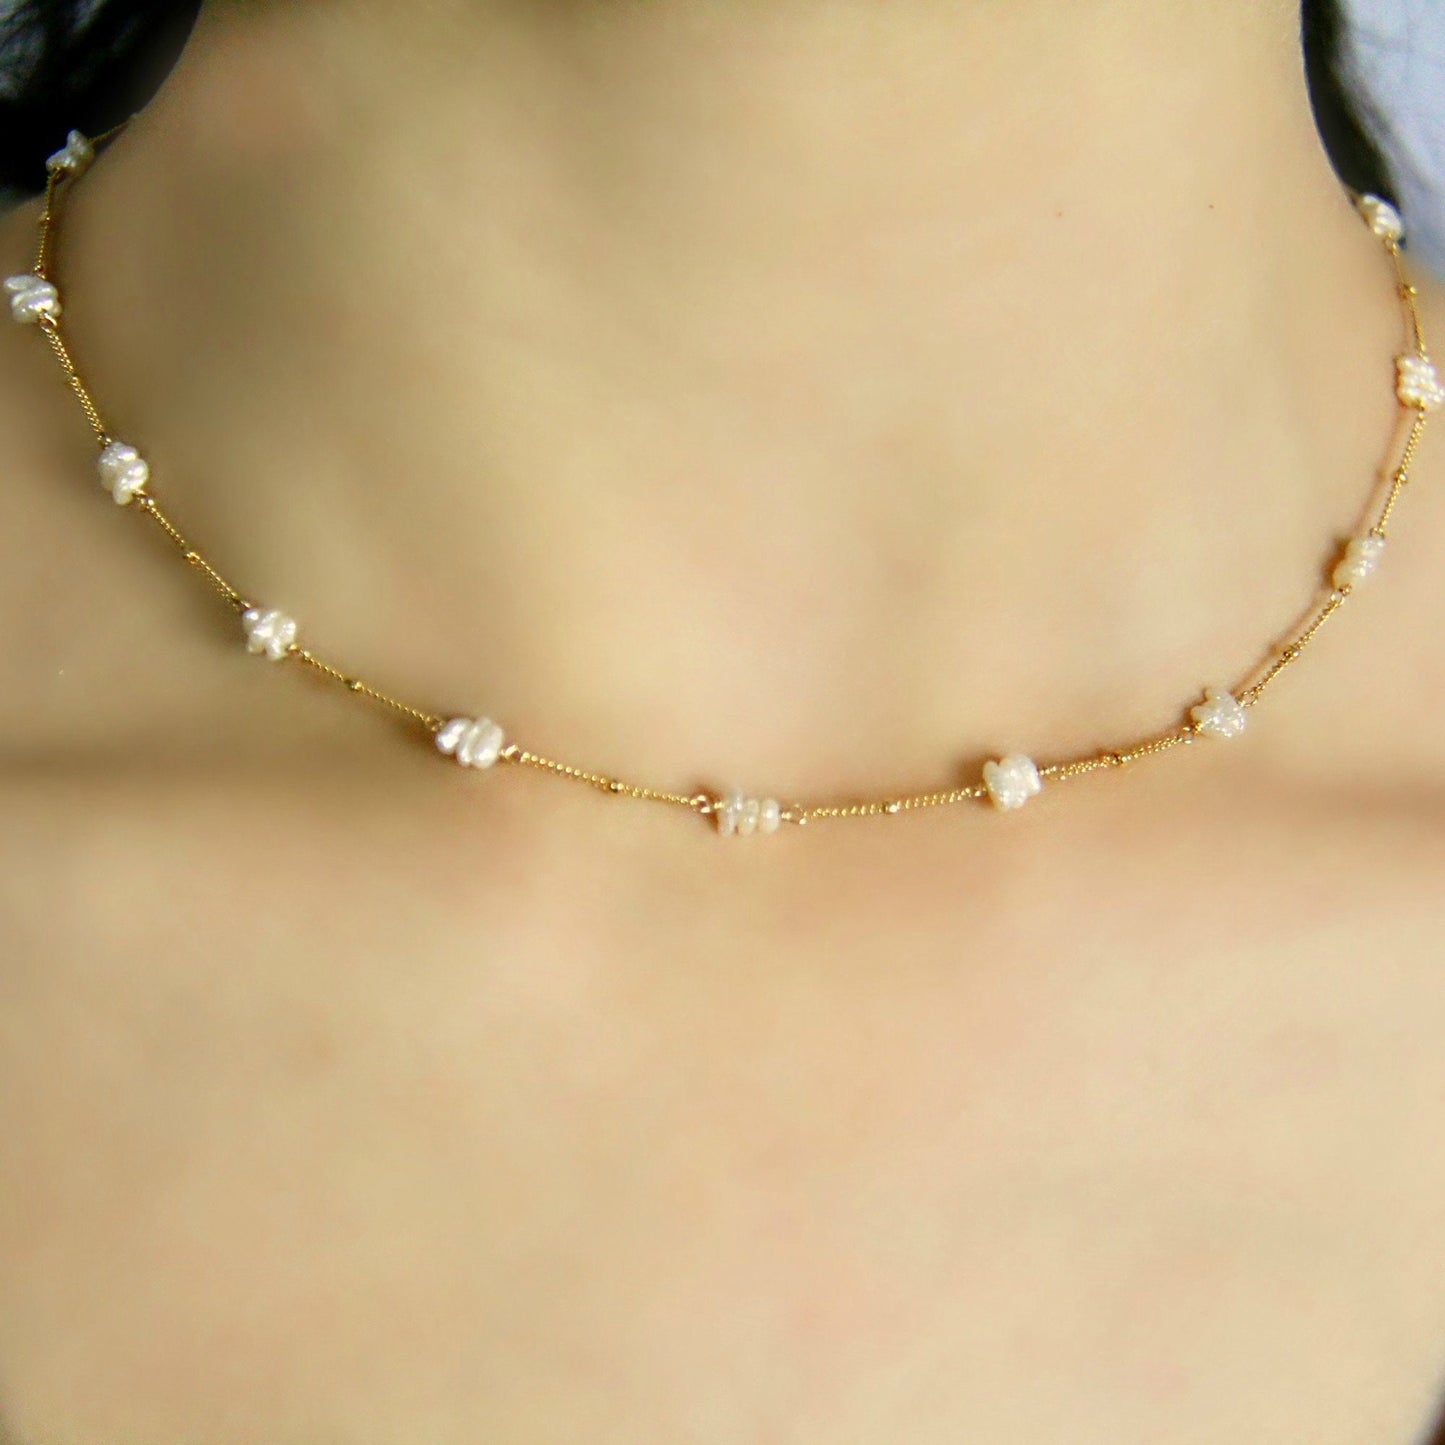 Pearl Necklace Choker Necklace Layering Necklace Dainty Necklace Handmade Jewelry June Birthstone Wedding Necklace Pearl Jewelry